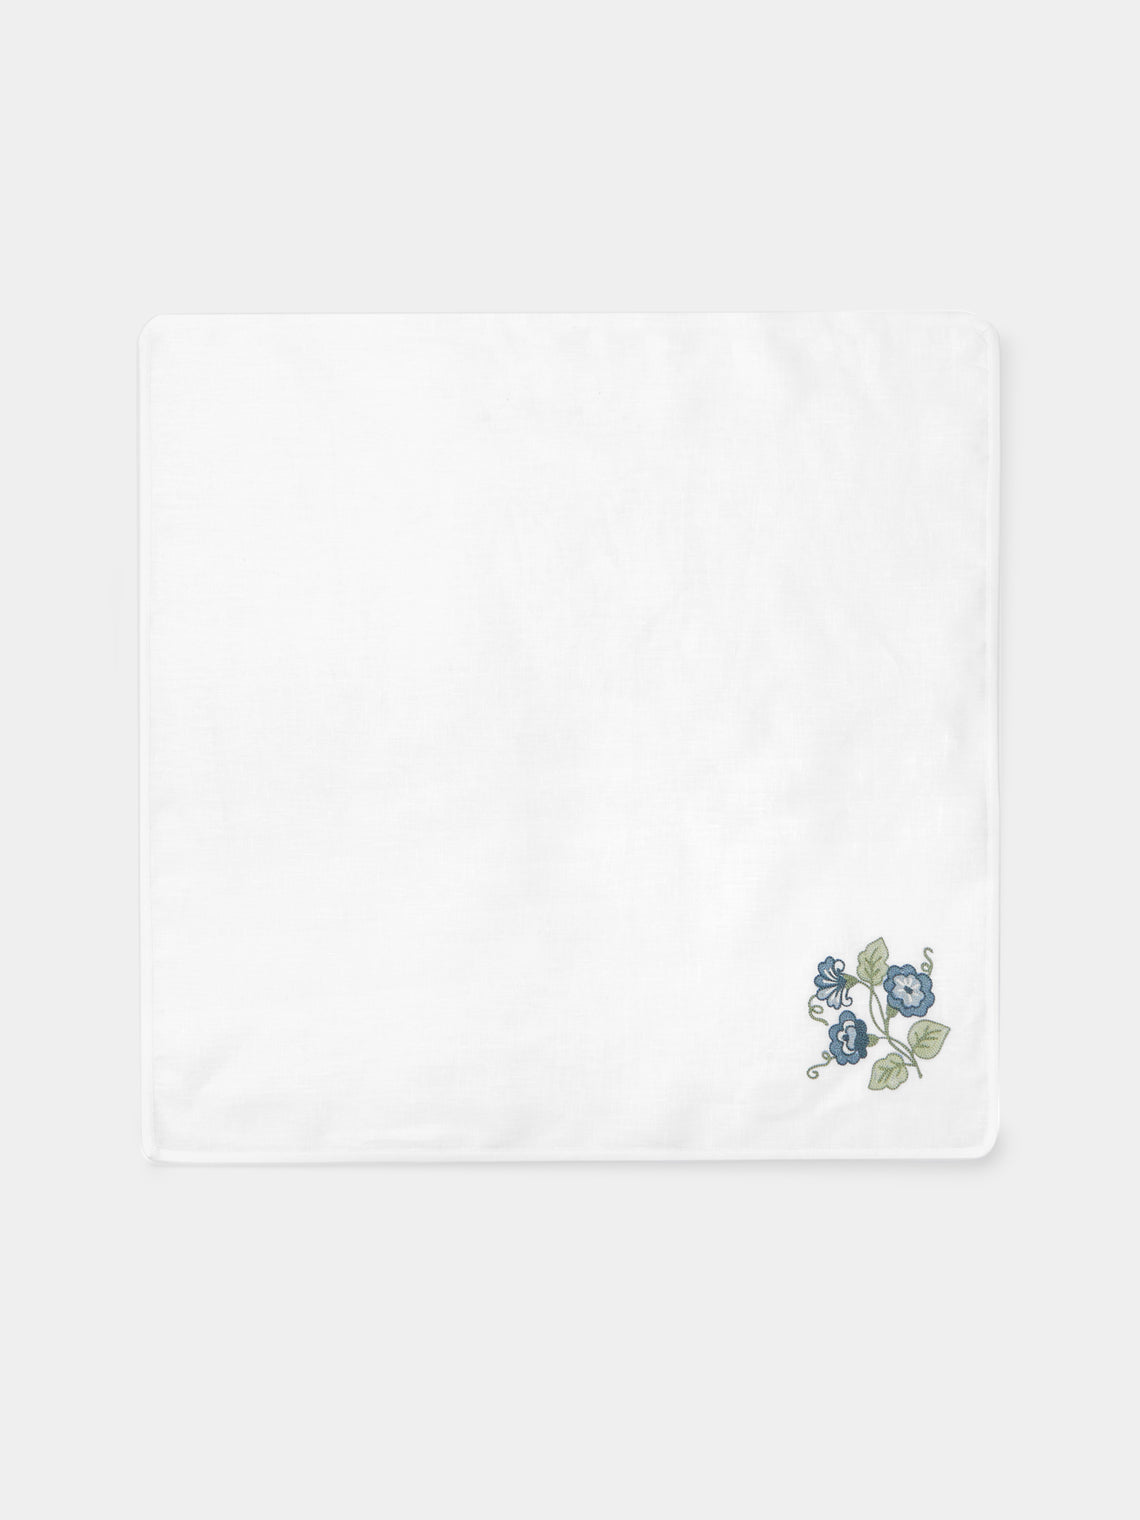 Loretta Caponi - Morning Glory Hand-Embroidered Linen Placemats and Napkins (Set of 2) - White - ABASK